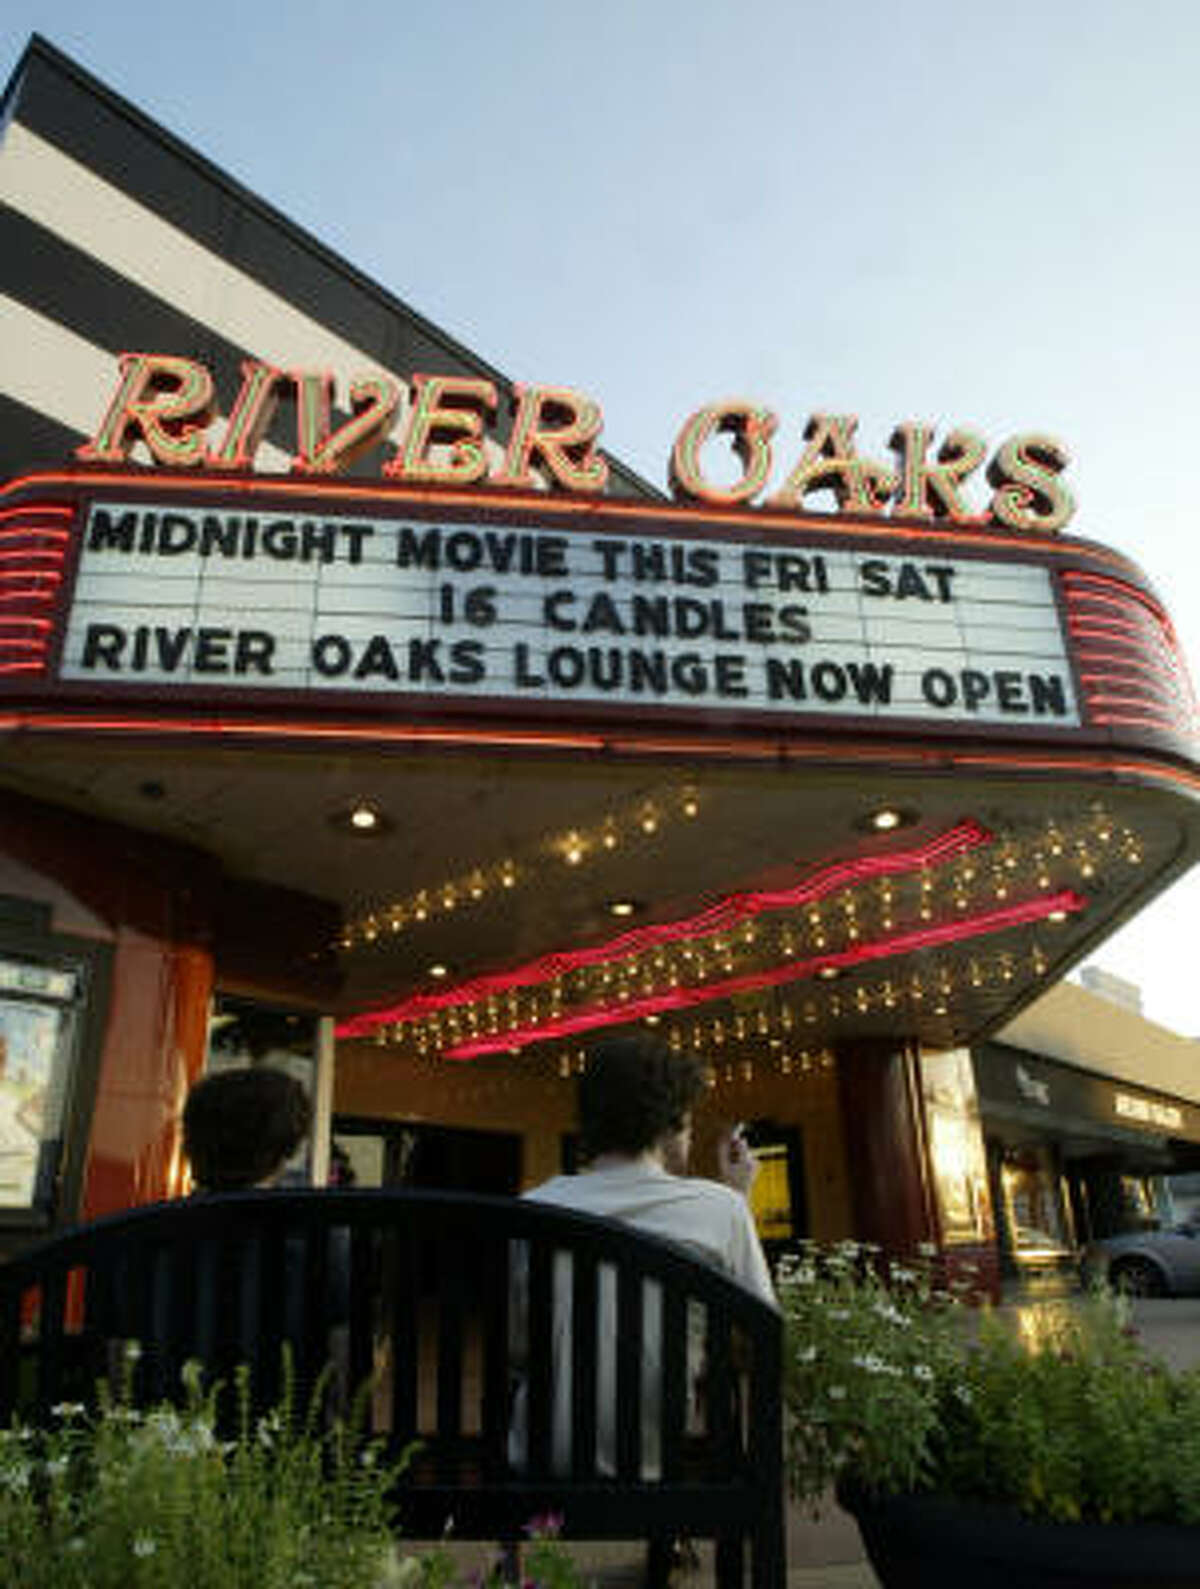 The Greater Houston Preservation Alliance set off the furor last week when it named the River Oaks Shopping Center and the Landmark River Oaks Theatre to its Endangered Buildings List.